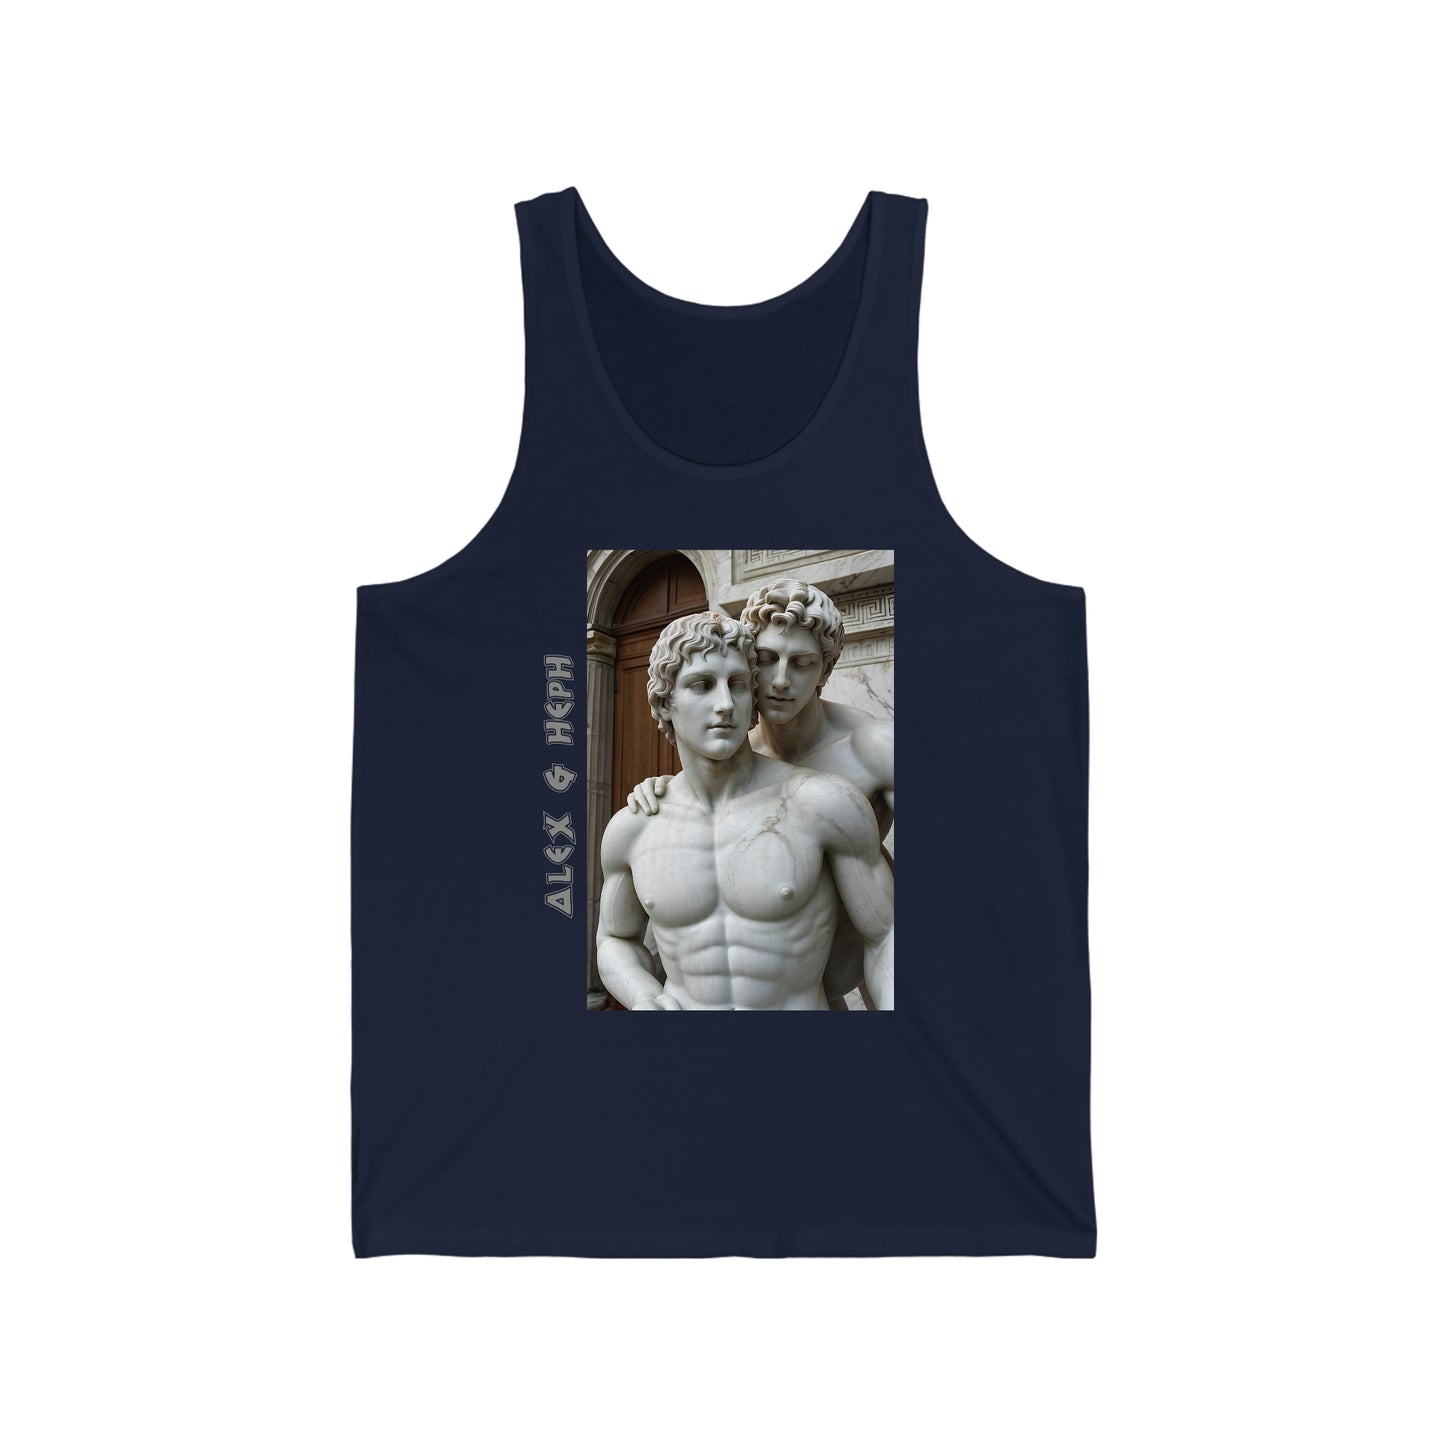 Alex & Heph Marble Statues - Alexander the Great and Hephaestion Tank Tank Top